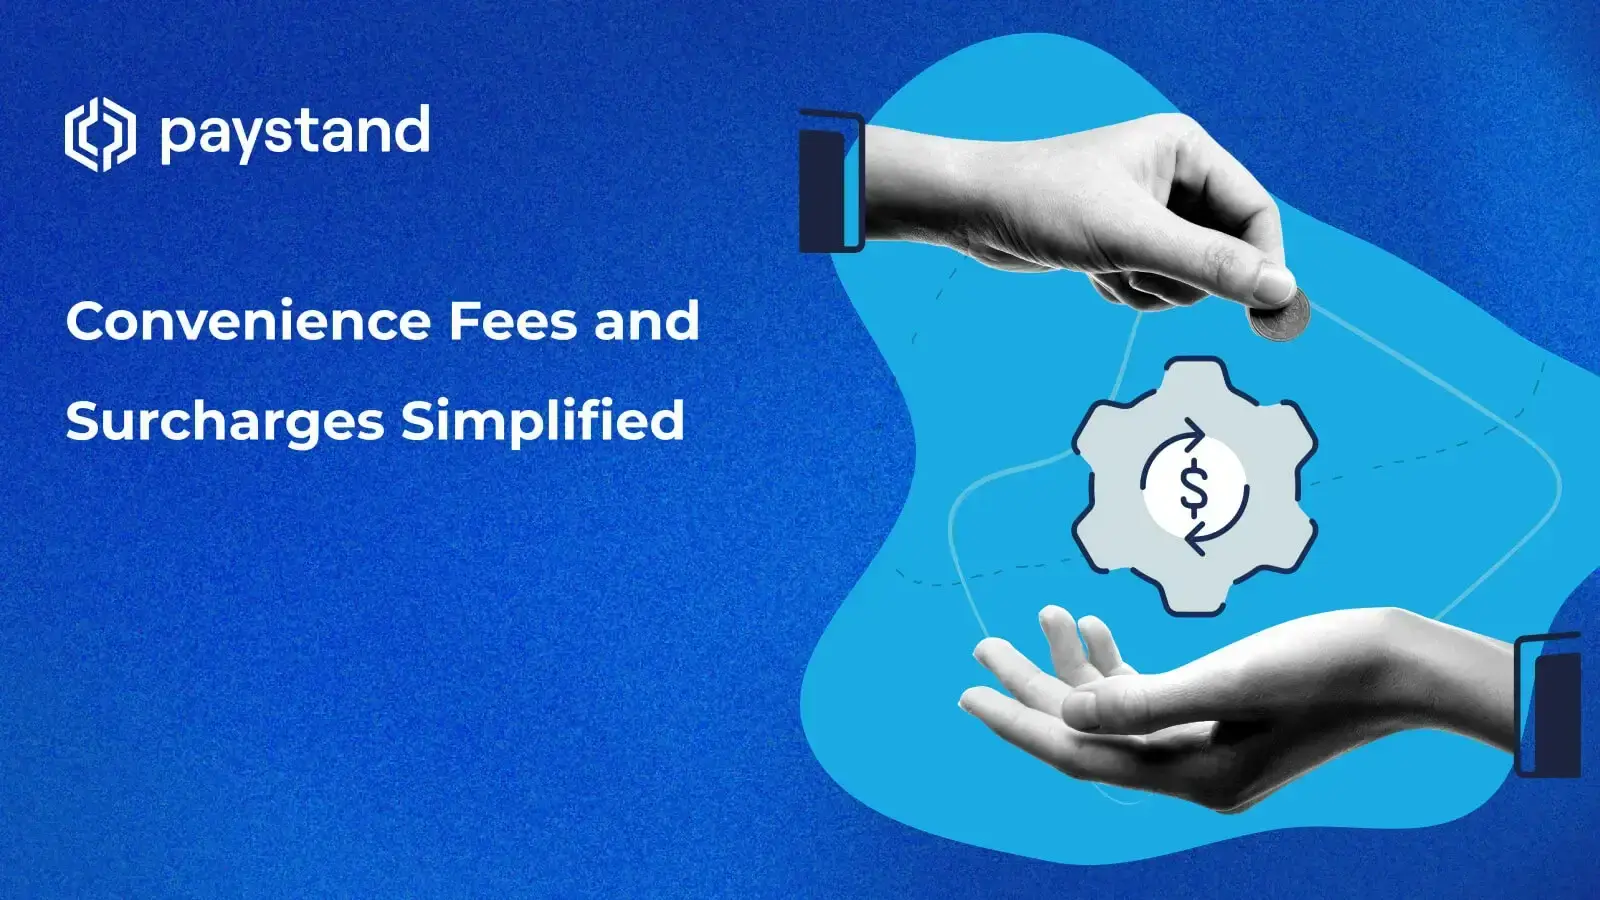 Convenience Fees and Surcharges Simplified